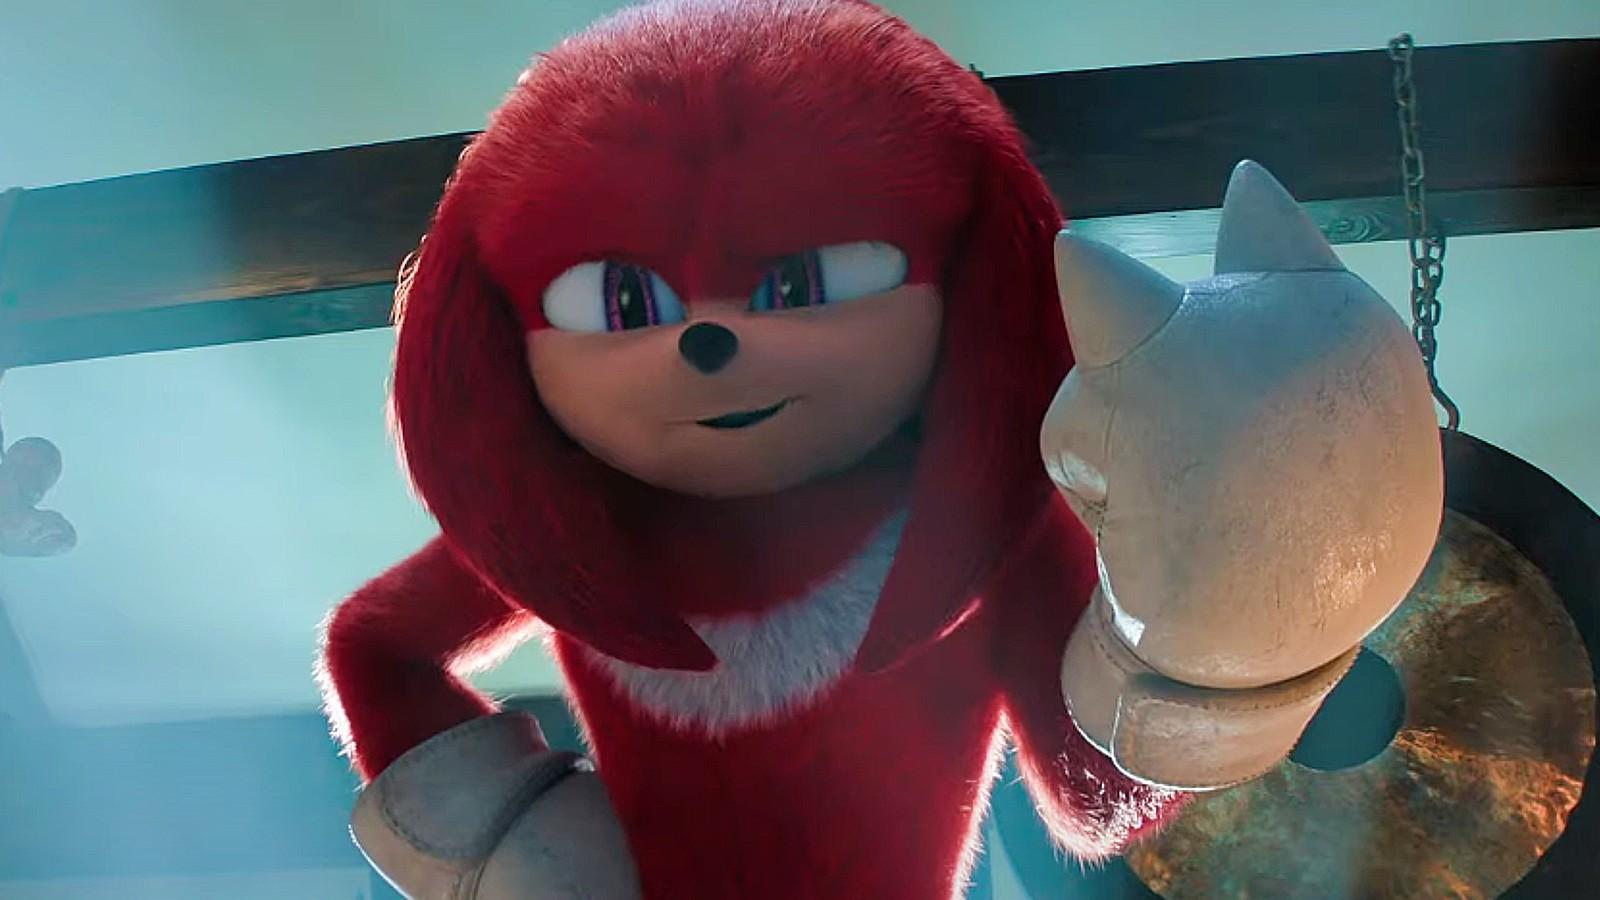 Knuckles series drops first amazing trailer with Sonic & Tails Dexerto